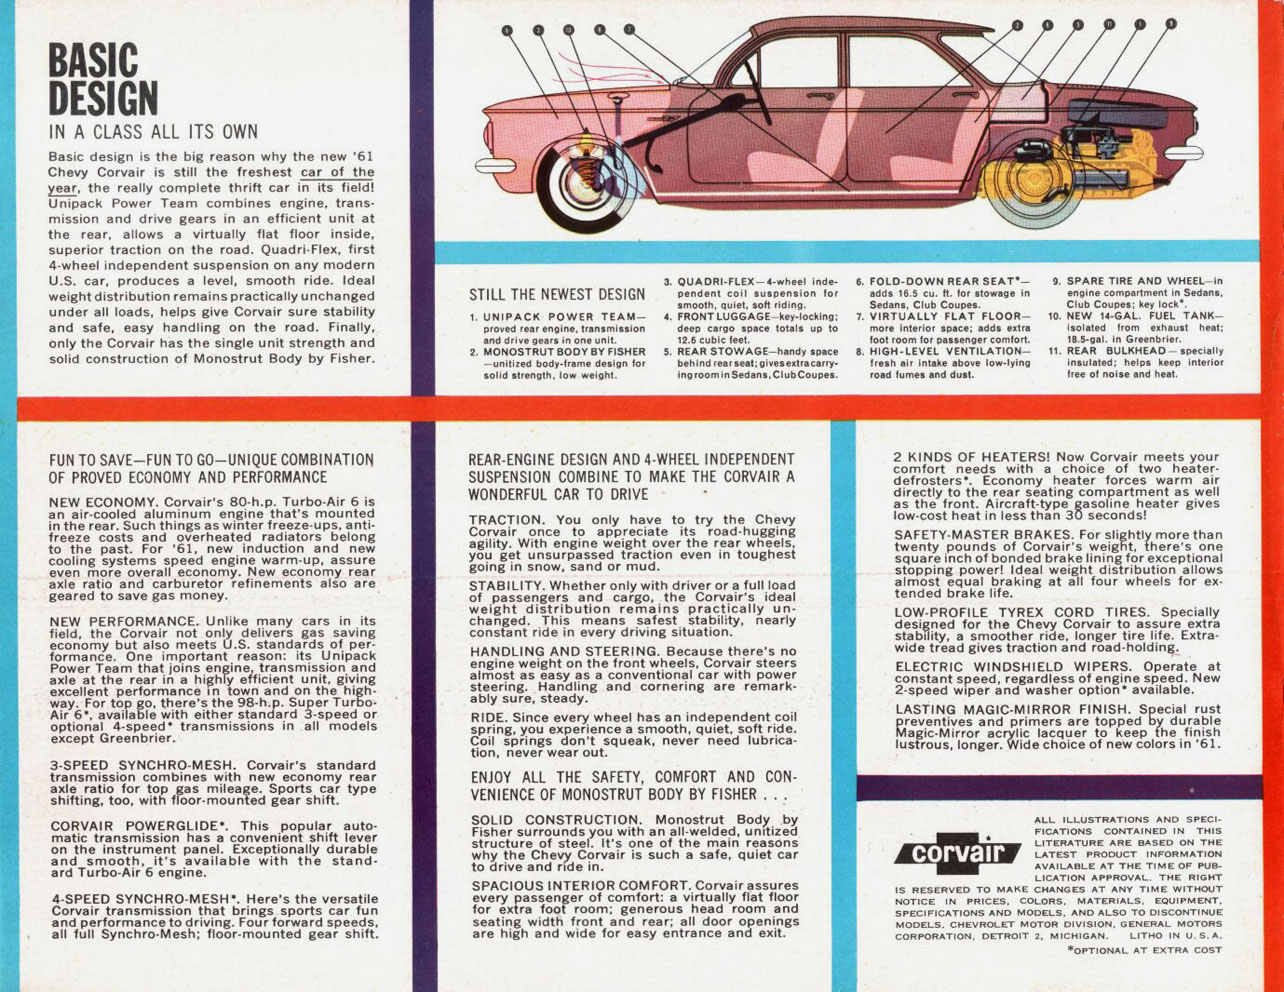 1961 Chevrolet Corvair Brochure Page 5